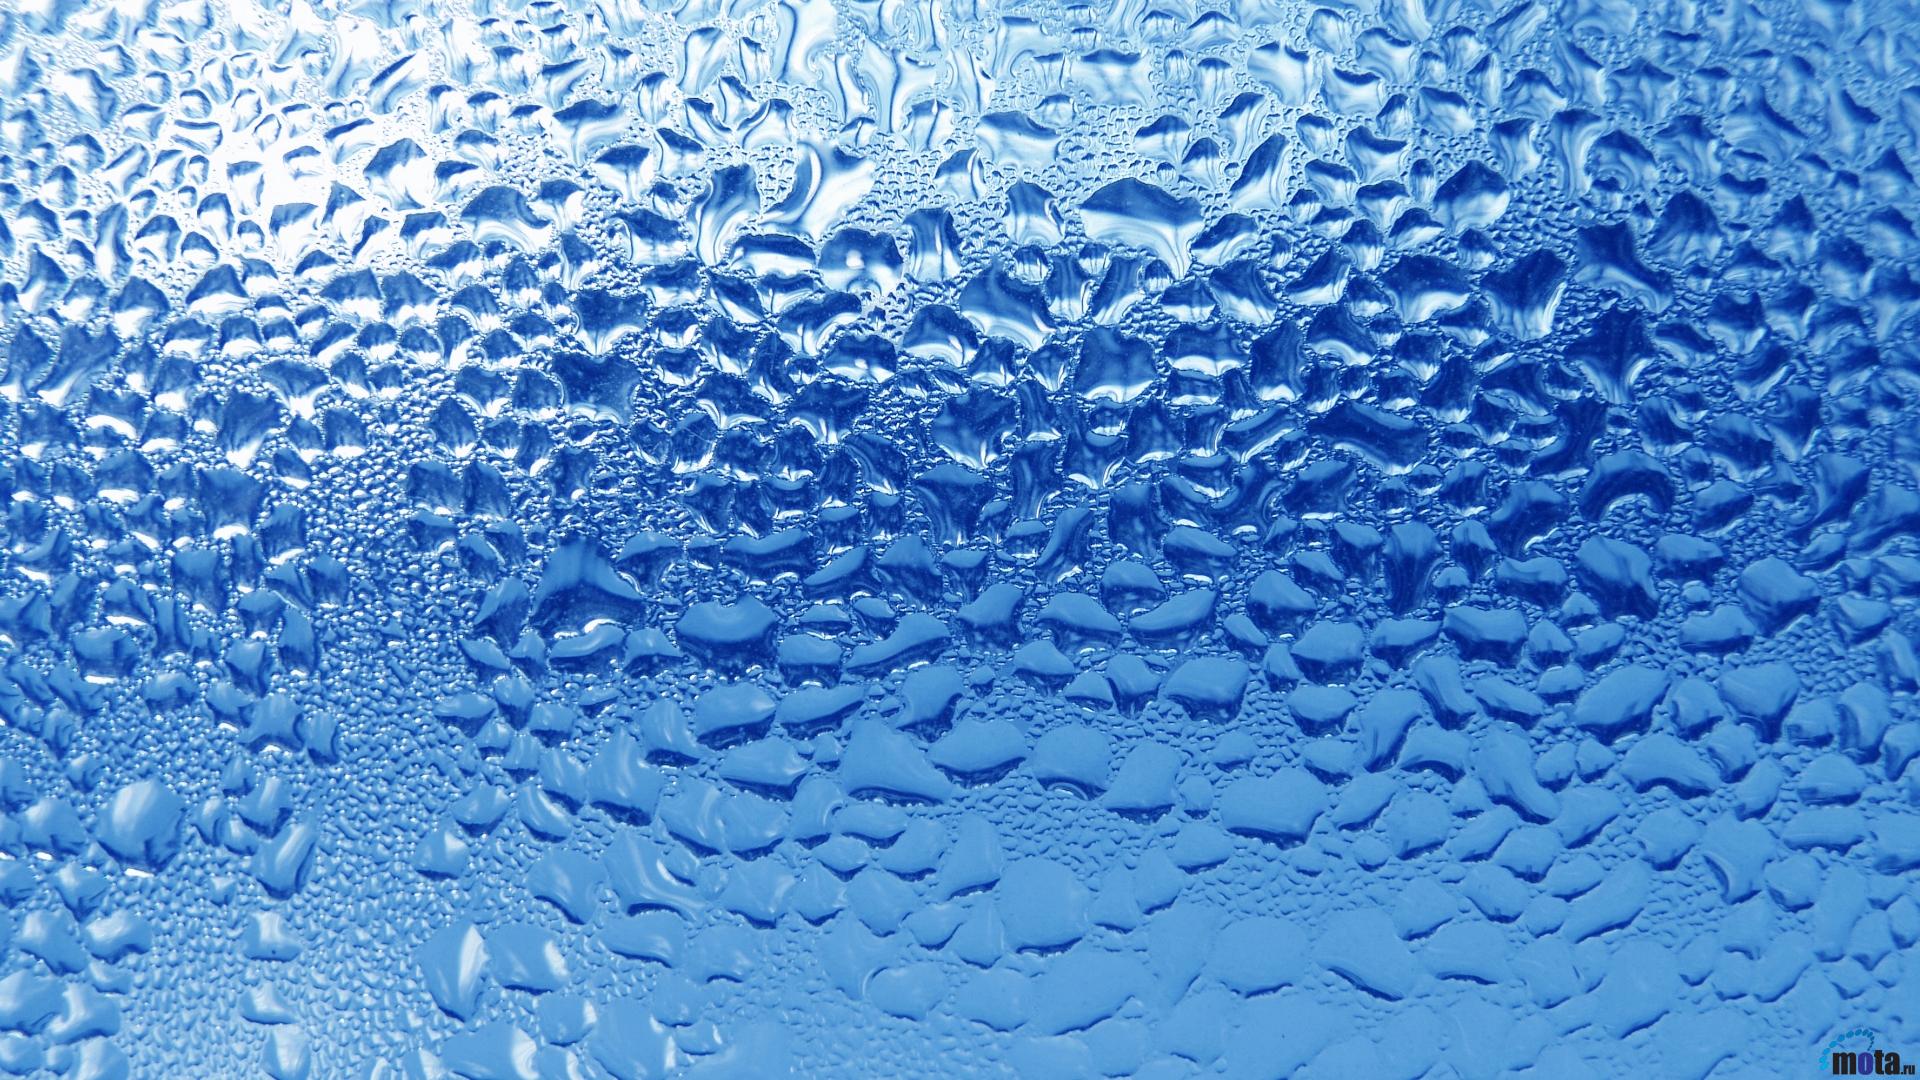 Download Wallpaper Water Drops on Window Glass Surface 1920 x 1080 1920x1080